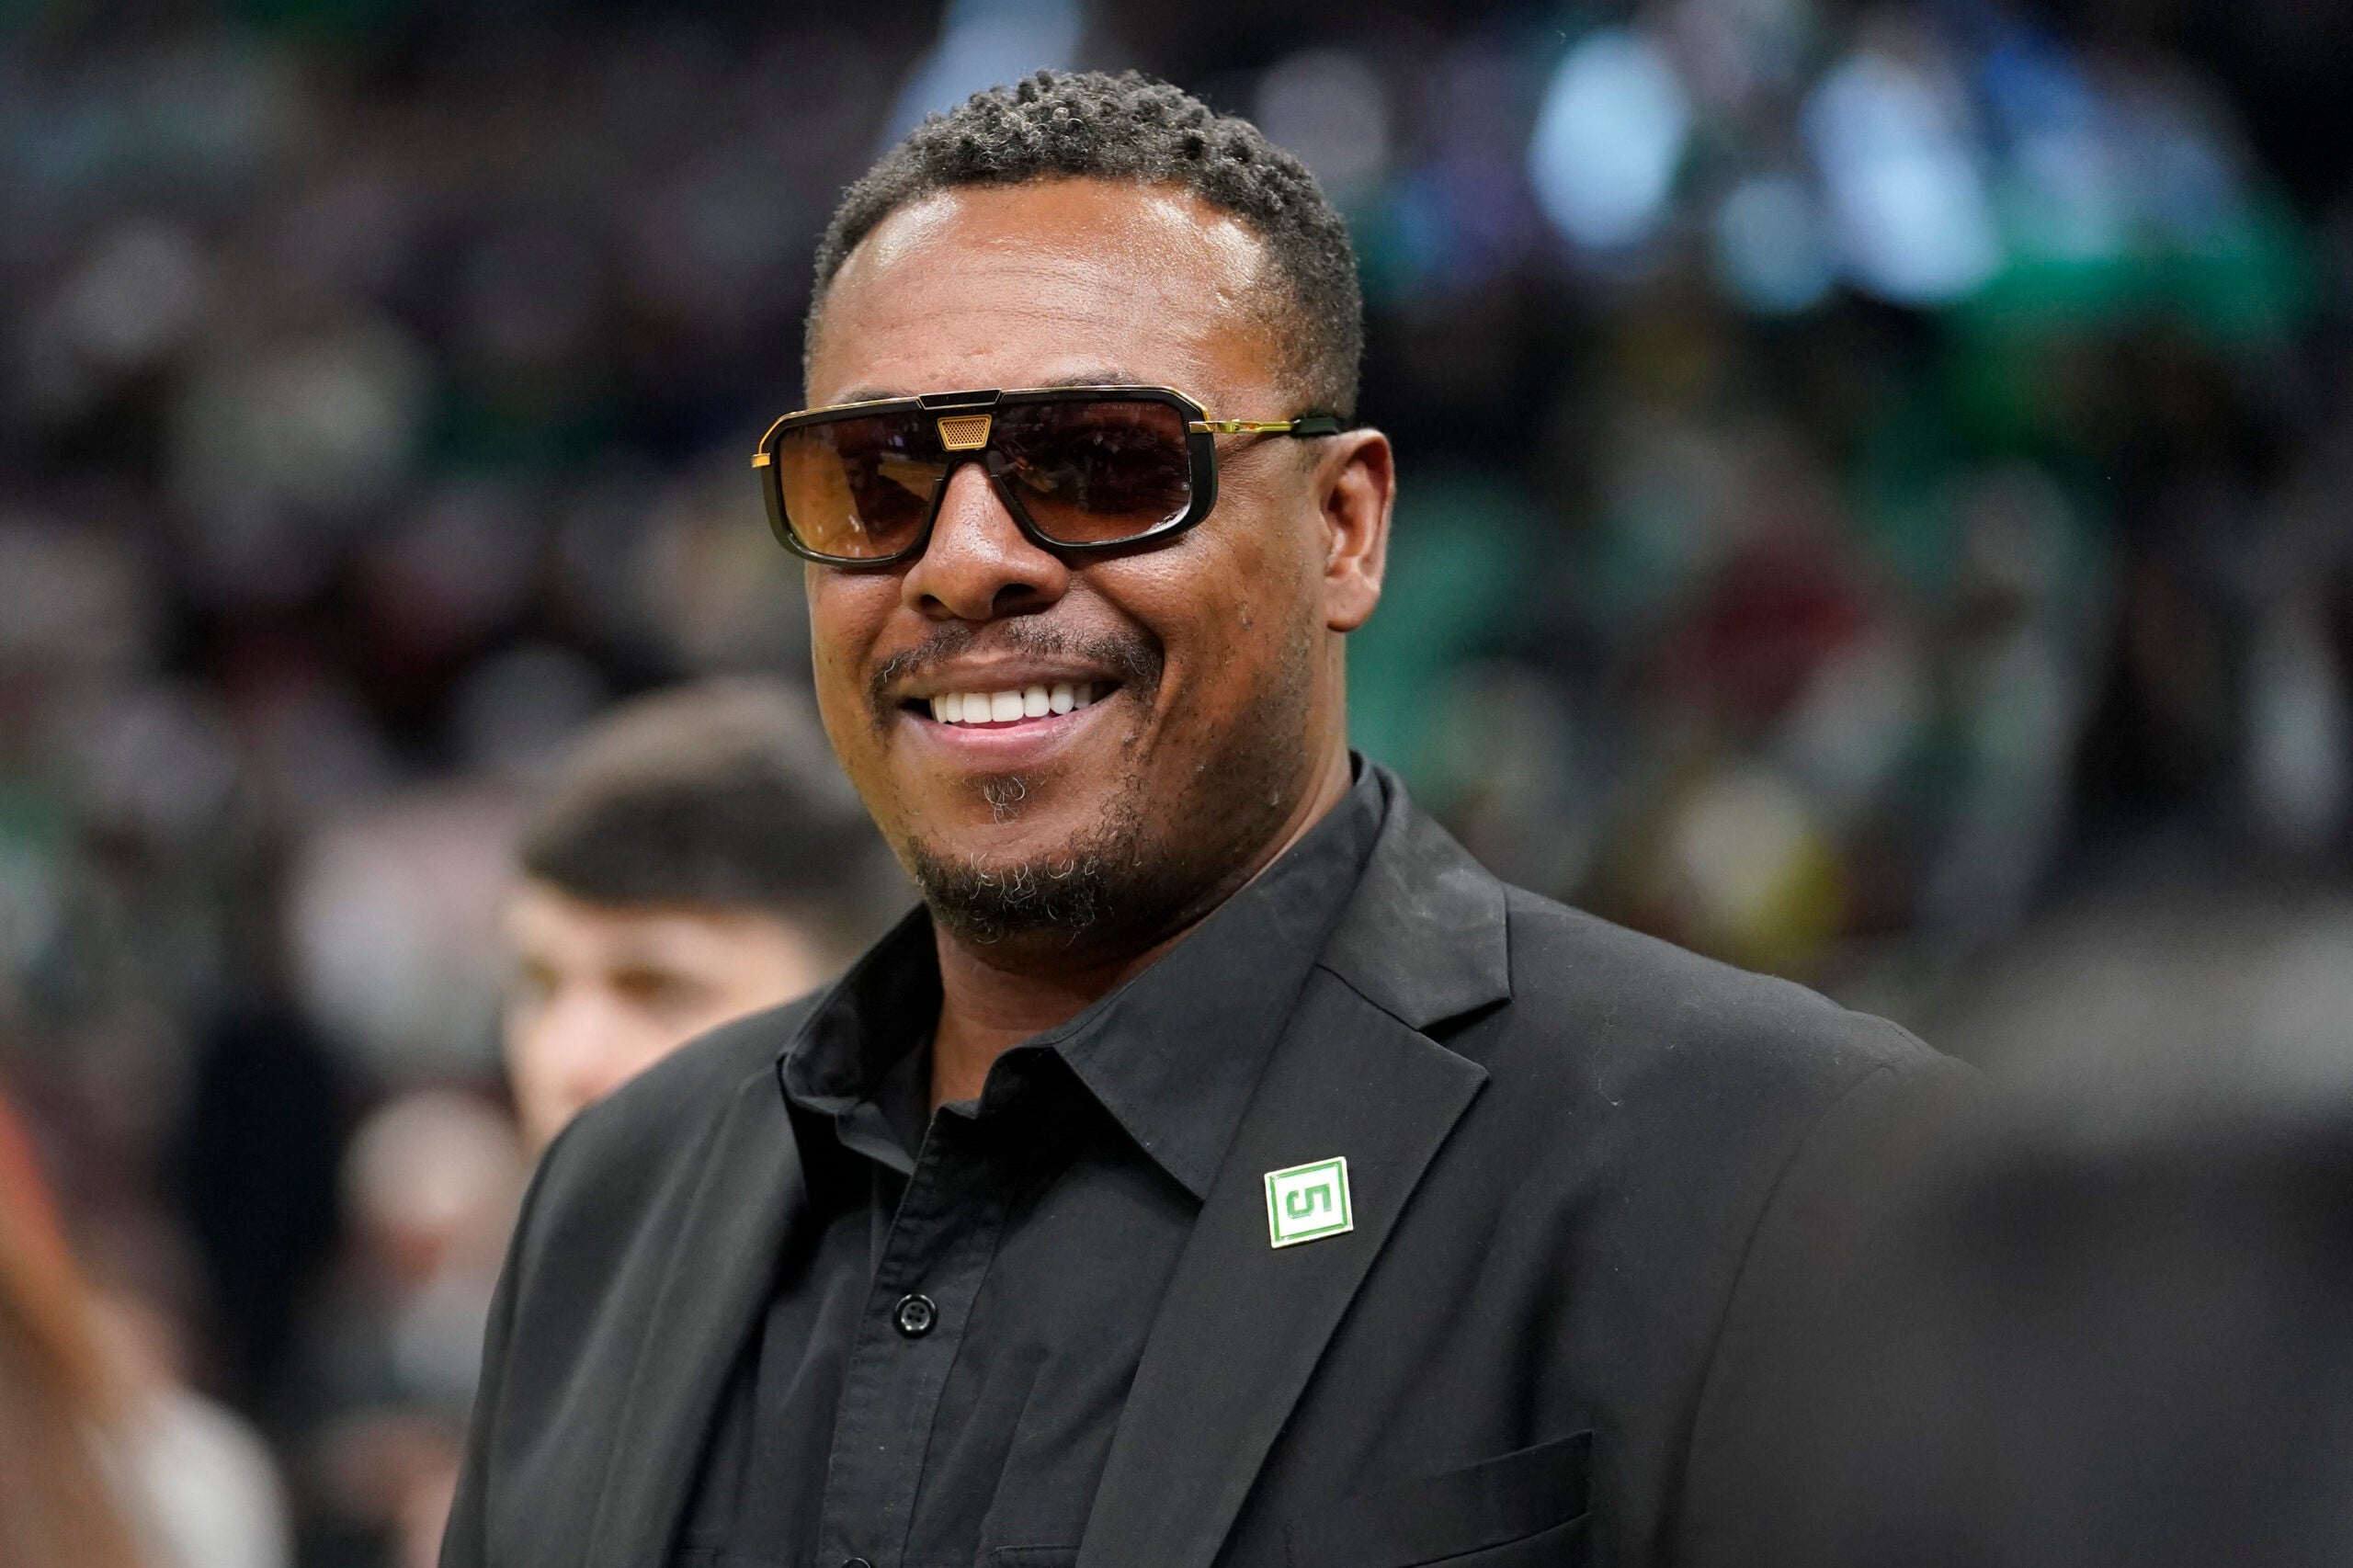 Report: Paul Pierce joining FS1's 'Undisputed' with Skip Bayless